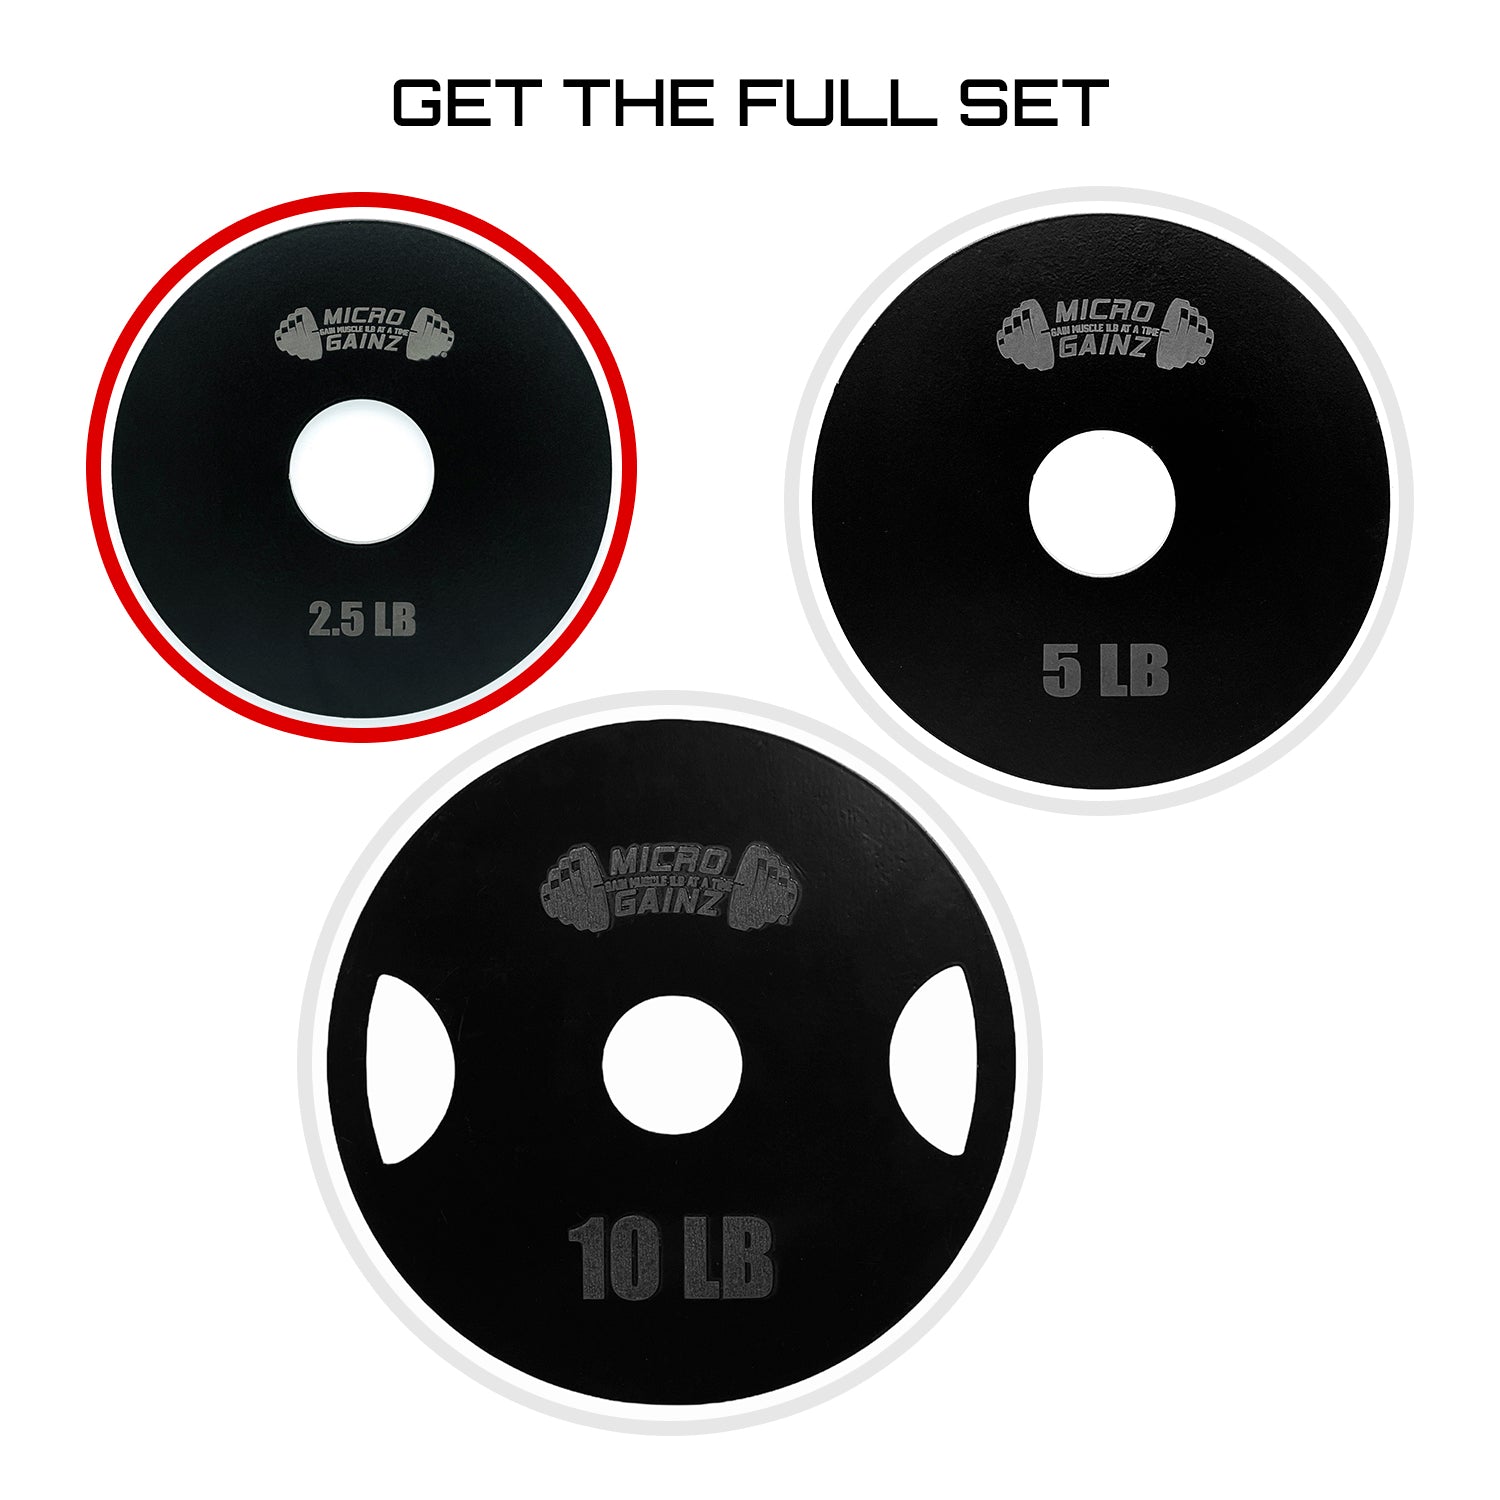 Micro Gainz Steel Olympic Weight Plates Pair of 2.5LB Plates